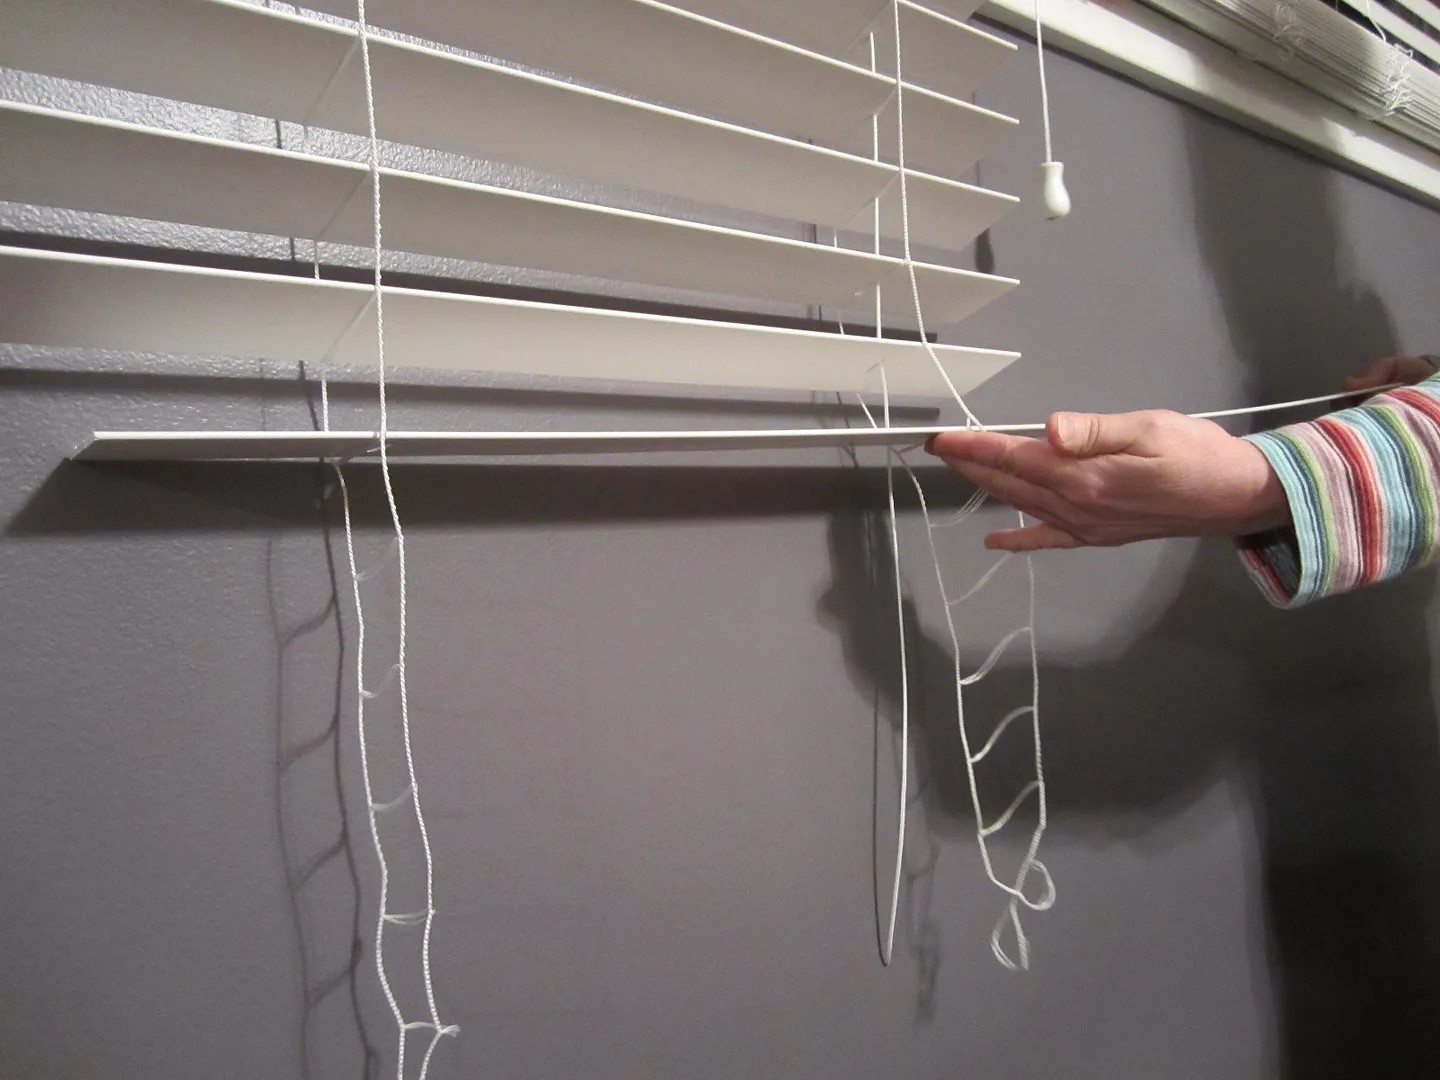 How To Replace Slats On Blinds